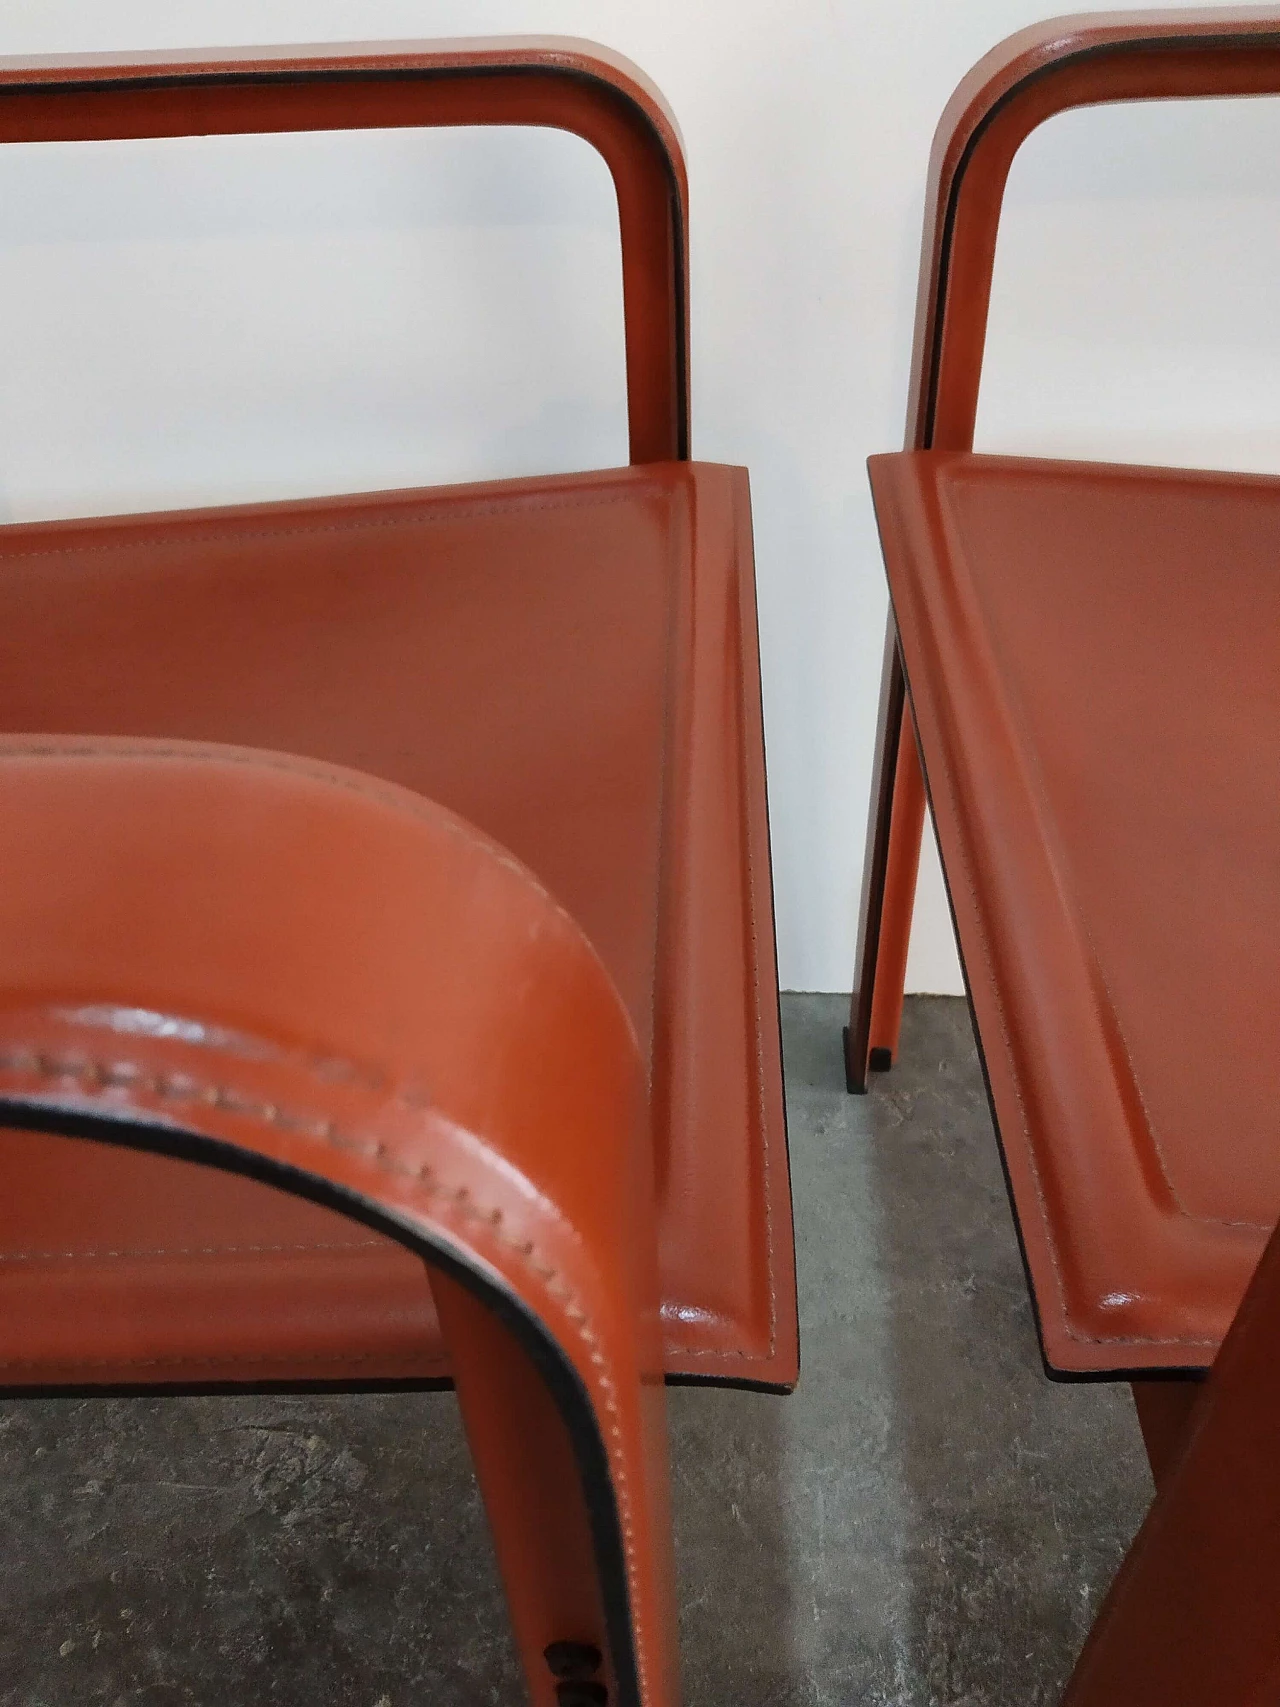 Pair of Golfo dei Poeti chairs by Toussaint & Angeloni manufactured by Matteo Grassi, 1980s 62